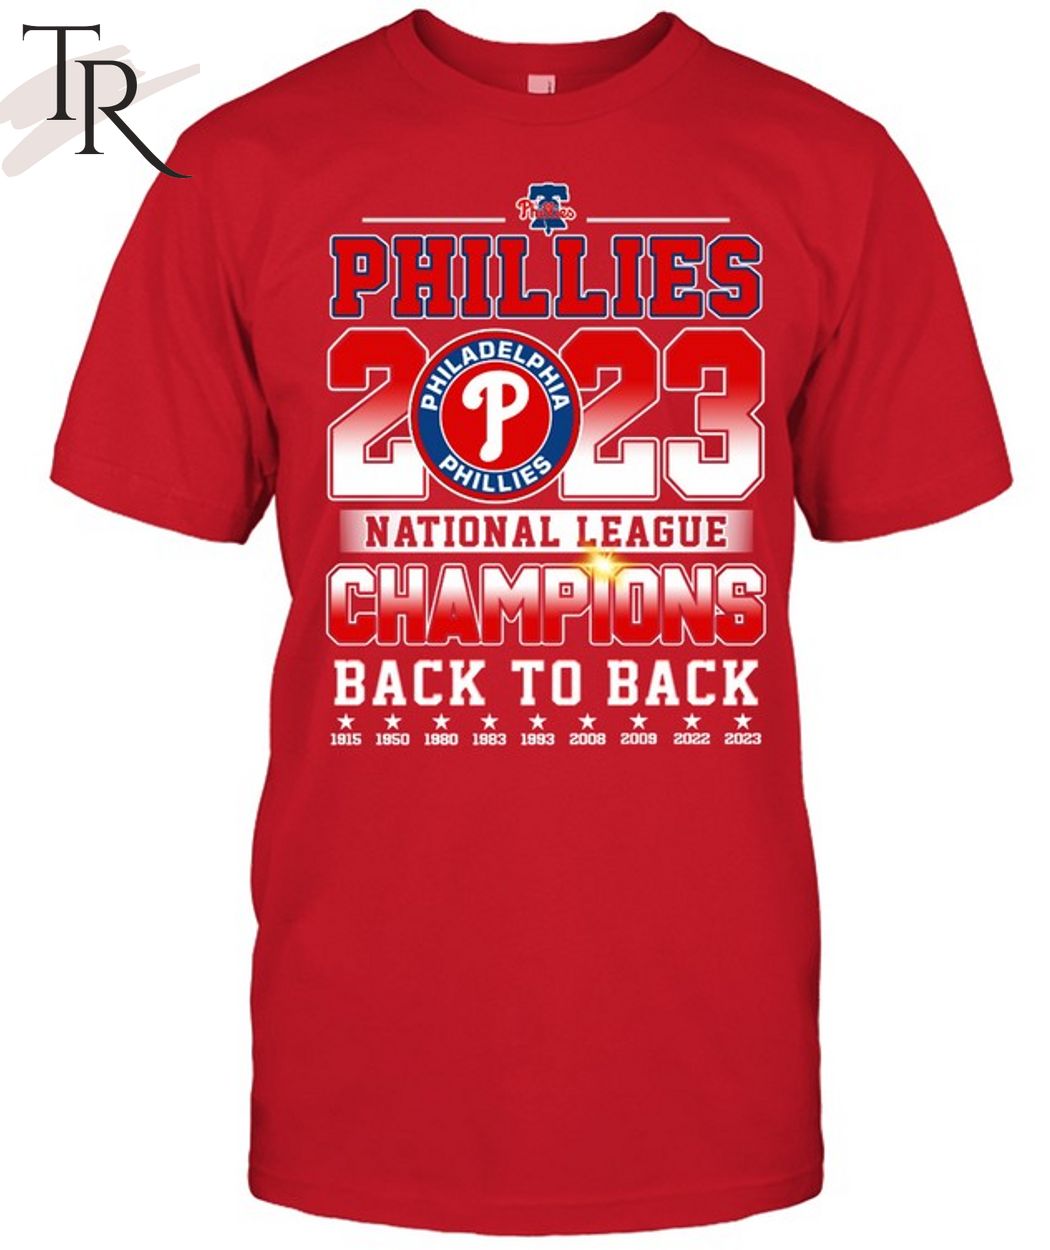 2023 World Champs Party Like Its 2008 Philadelphia Phillies T